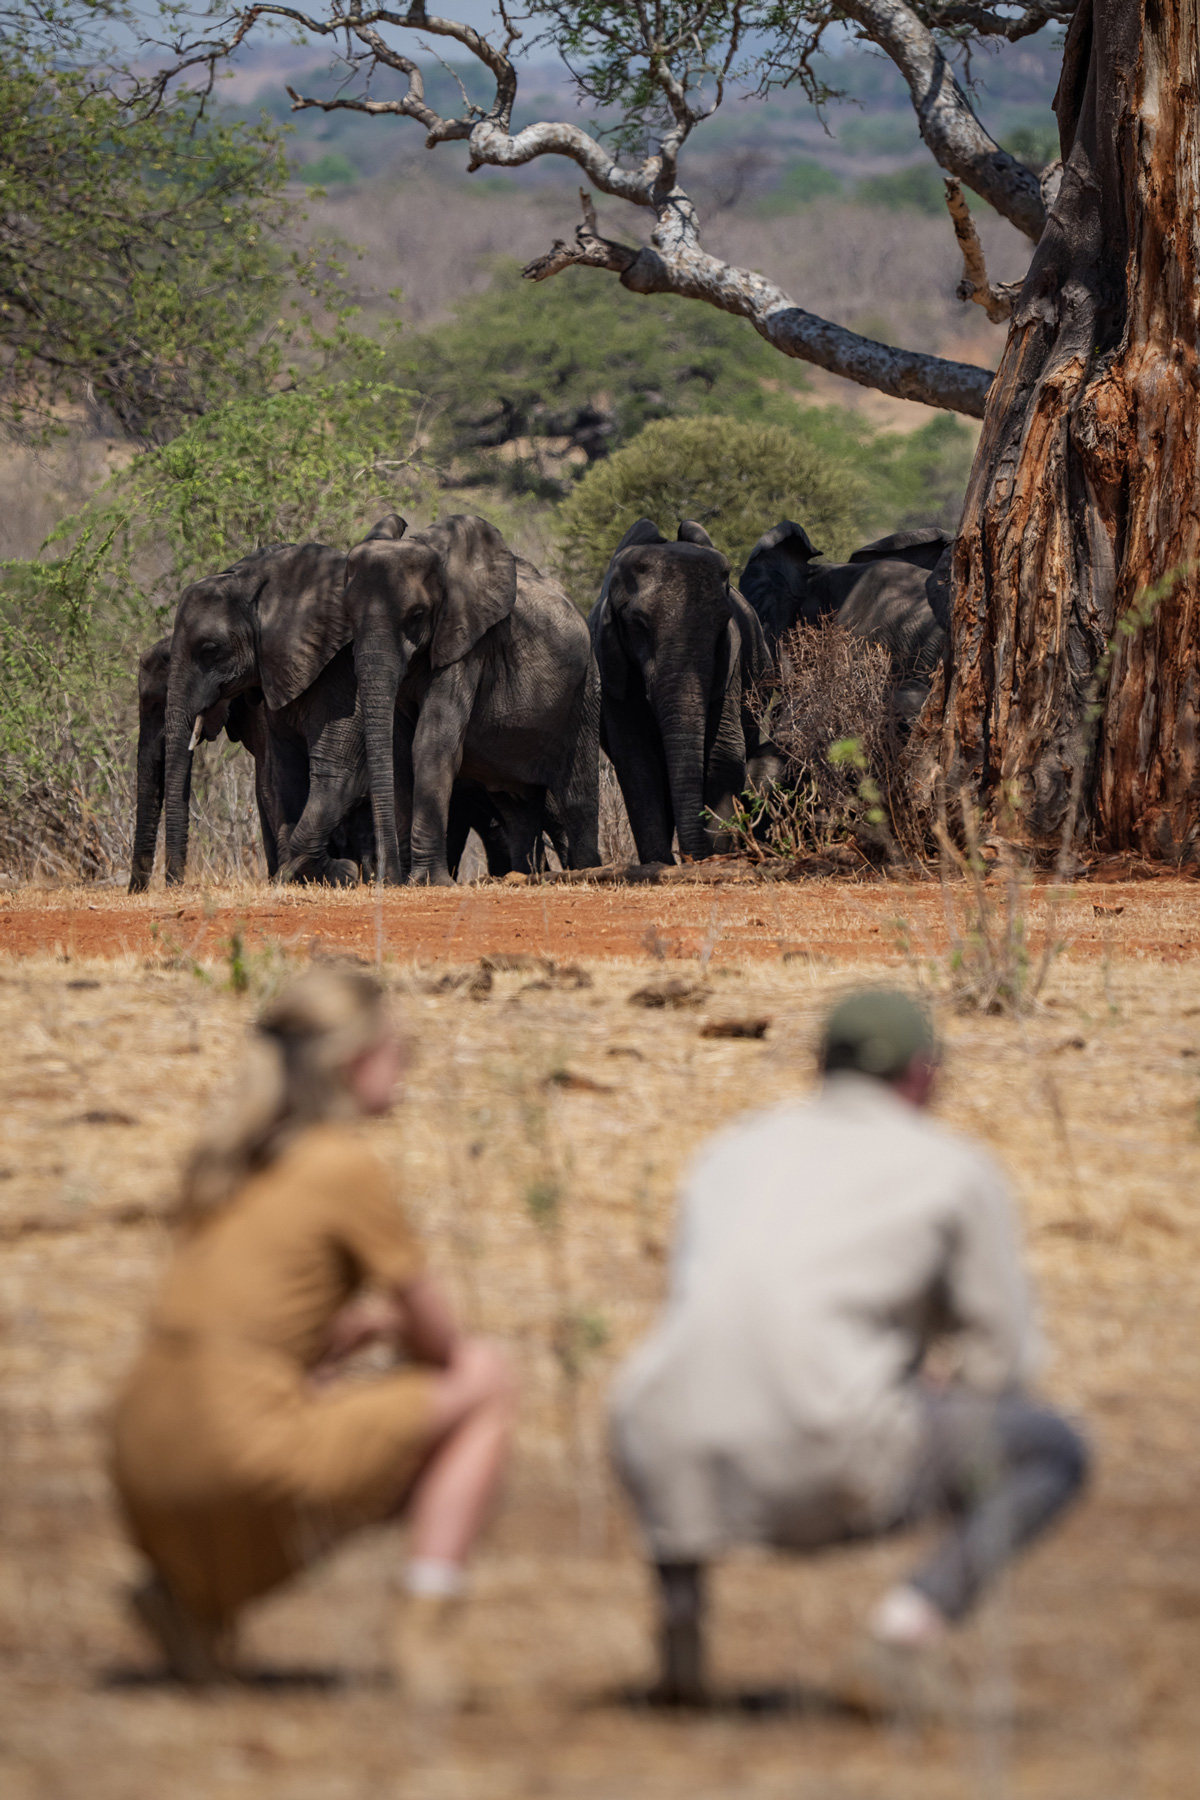 Walking safaris allow the opportunity to understand the smaller and wider aspects of safari. Spoor marks, dung types, vegetation medicinal elements, 'the little 5' and so much more. There is also the opportunity to walk with the larger resident wildlife. Image Credit: Jongomero